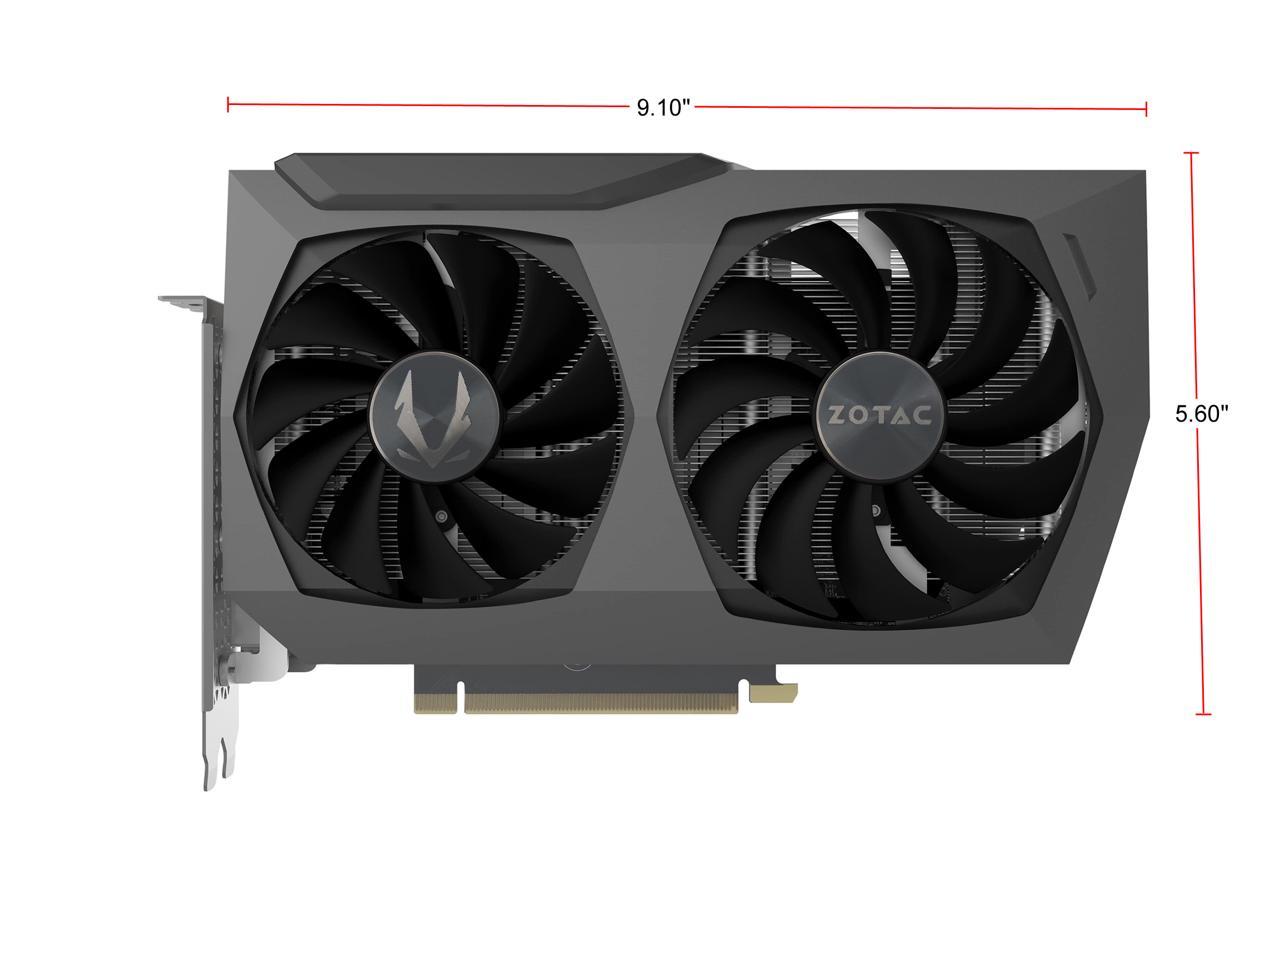 ZOTAC GAMING GeForce RTX 3070 Twin Edge 8GB GDDR6 256-bit 14 Gbps PCIE 4.0 Gaming Graphics Card, IceStorm 2.0 Advanced Cooling, White LED Logo Lighting, ZT-A30700E-10P